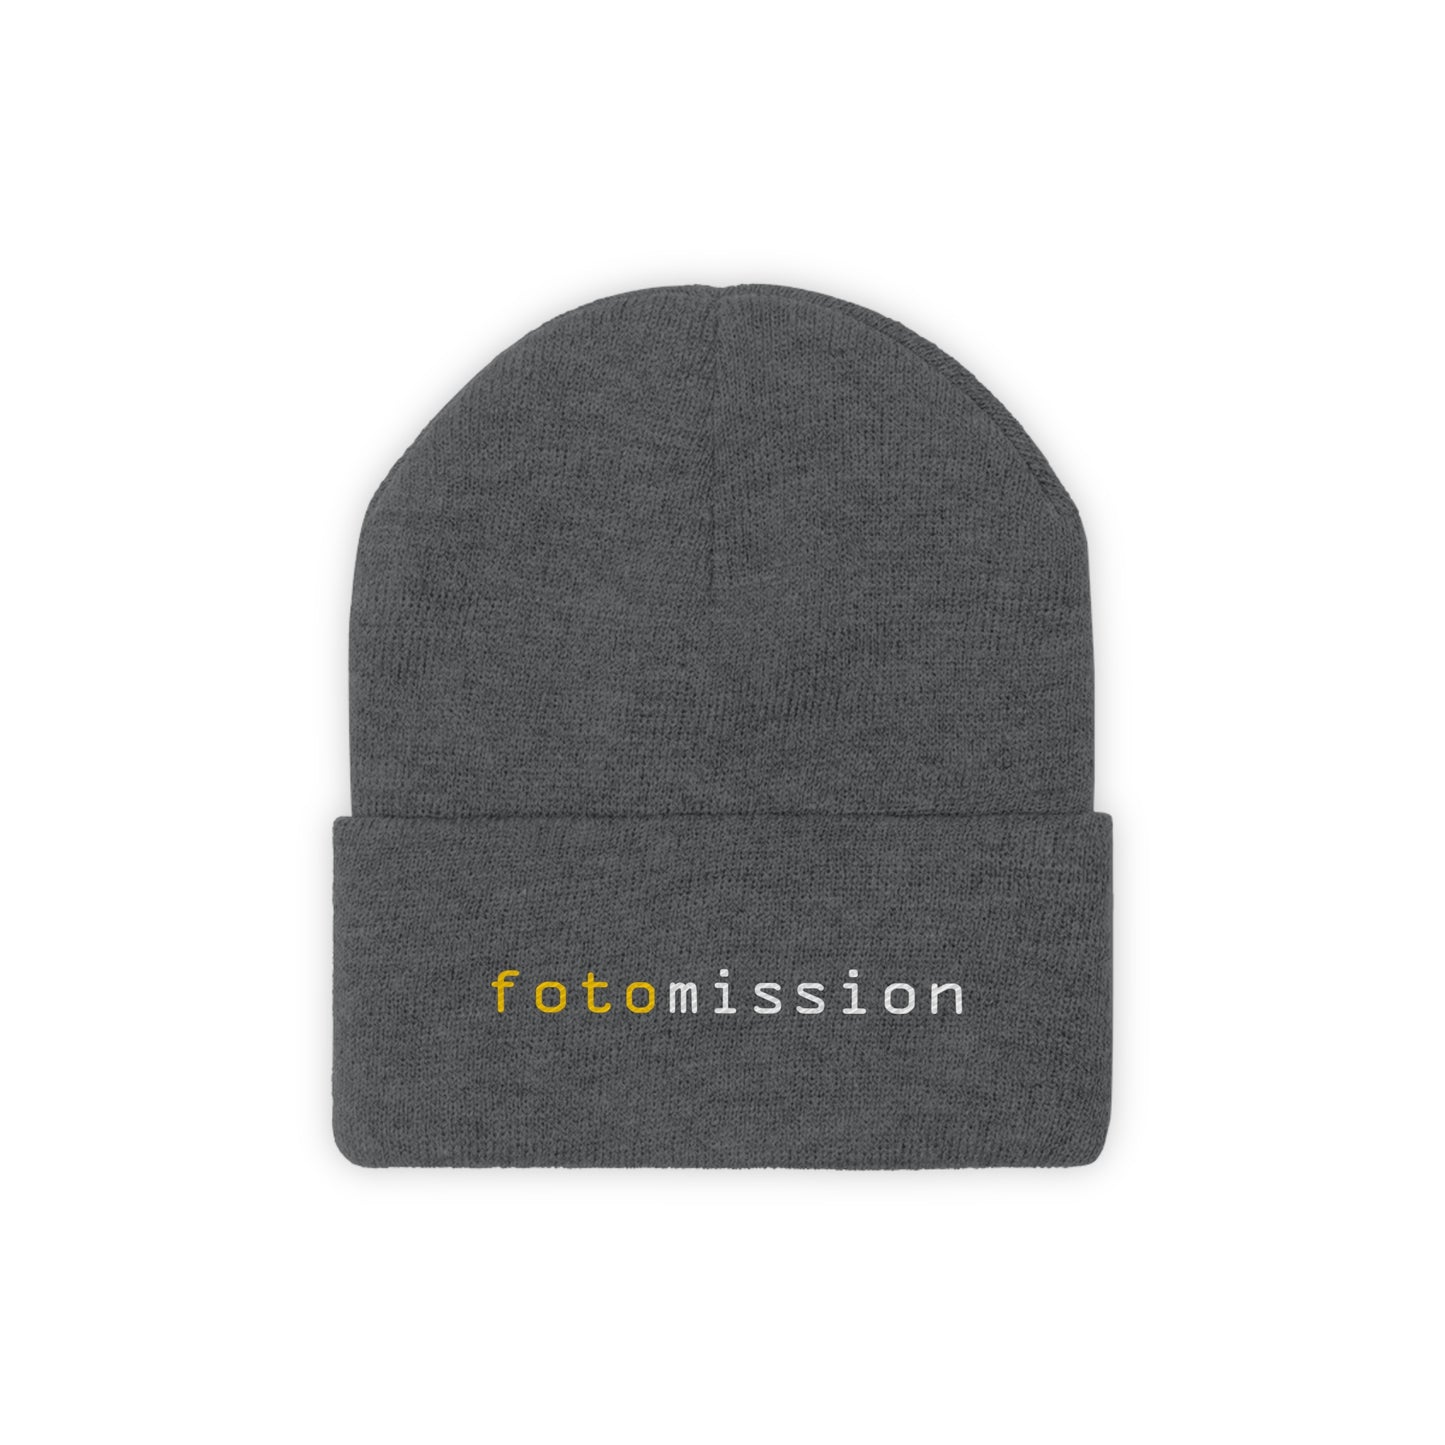 fotomission Knit Beanie